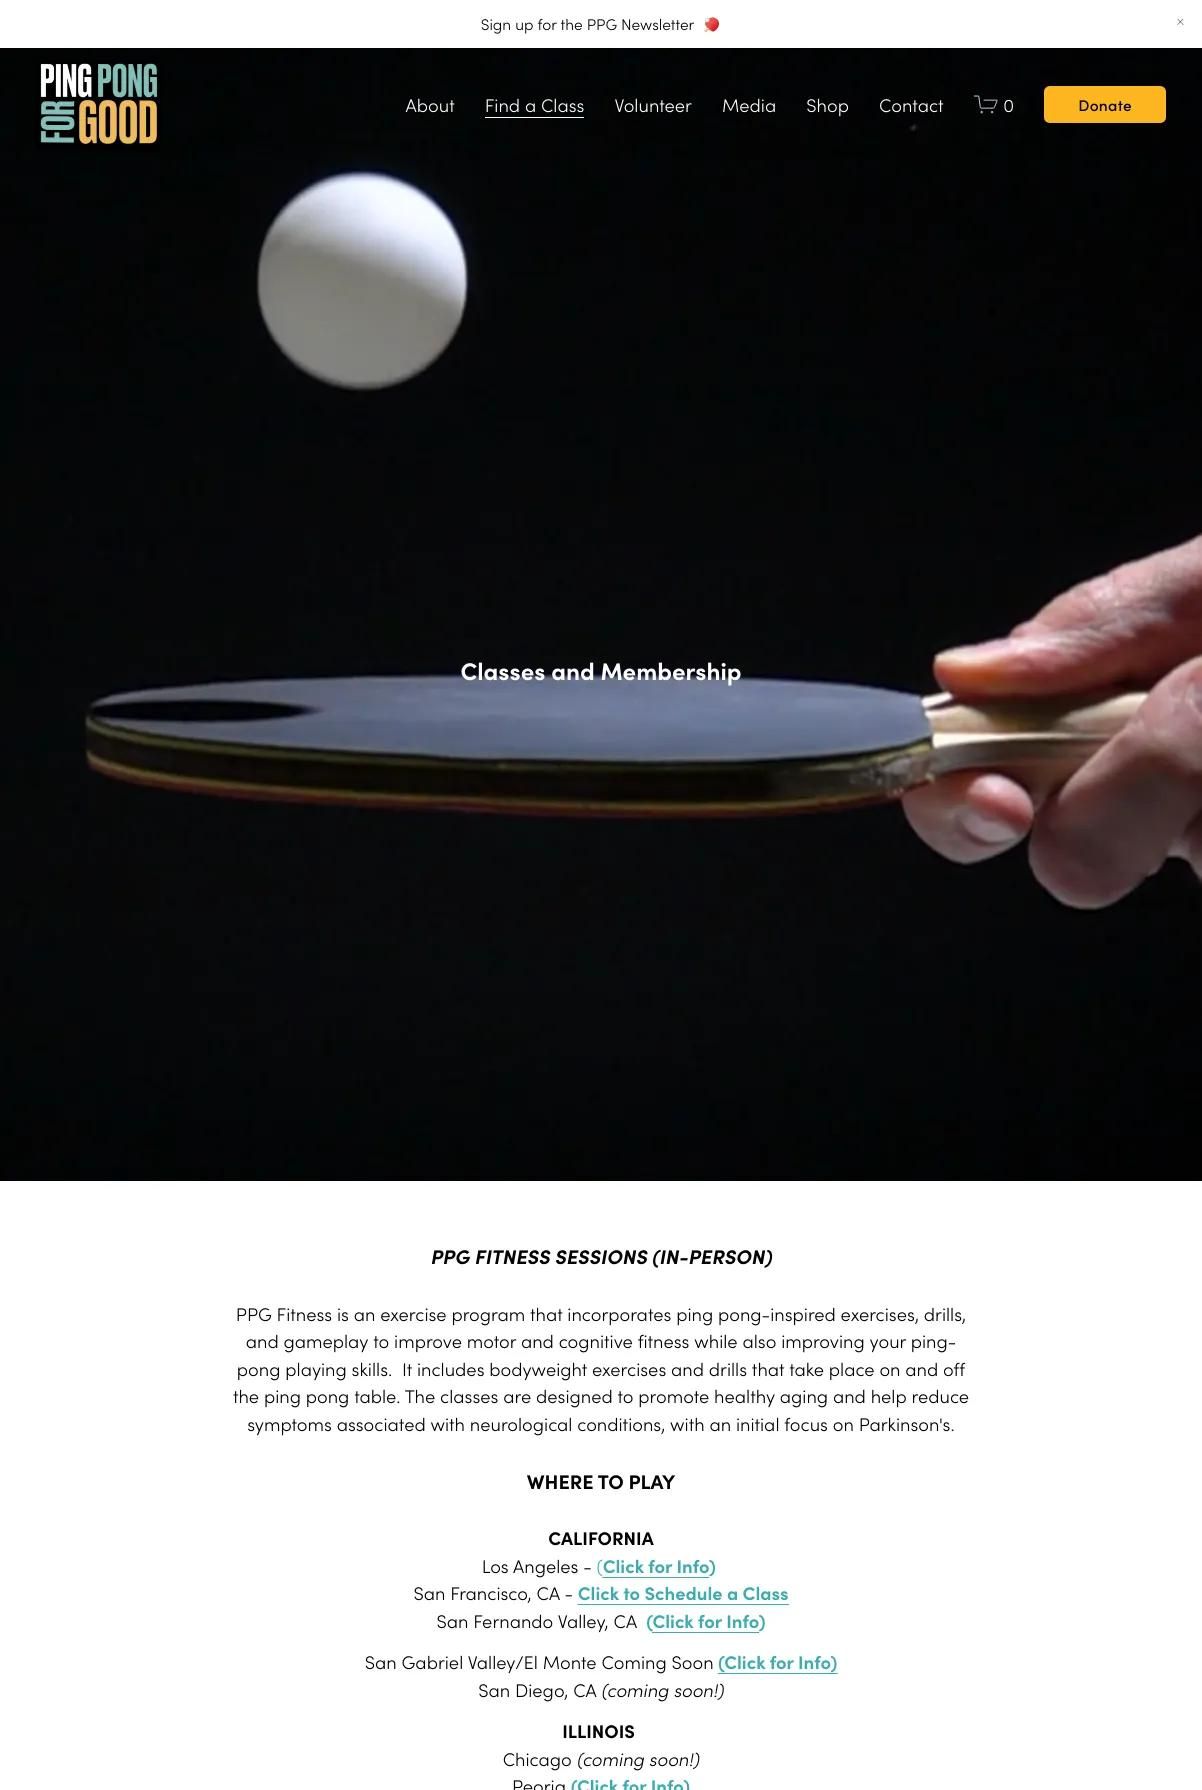 Screenshot 2 of Ping Pong for Good (Example Squarespace Nonprofit Website)